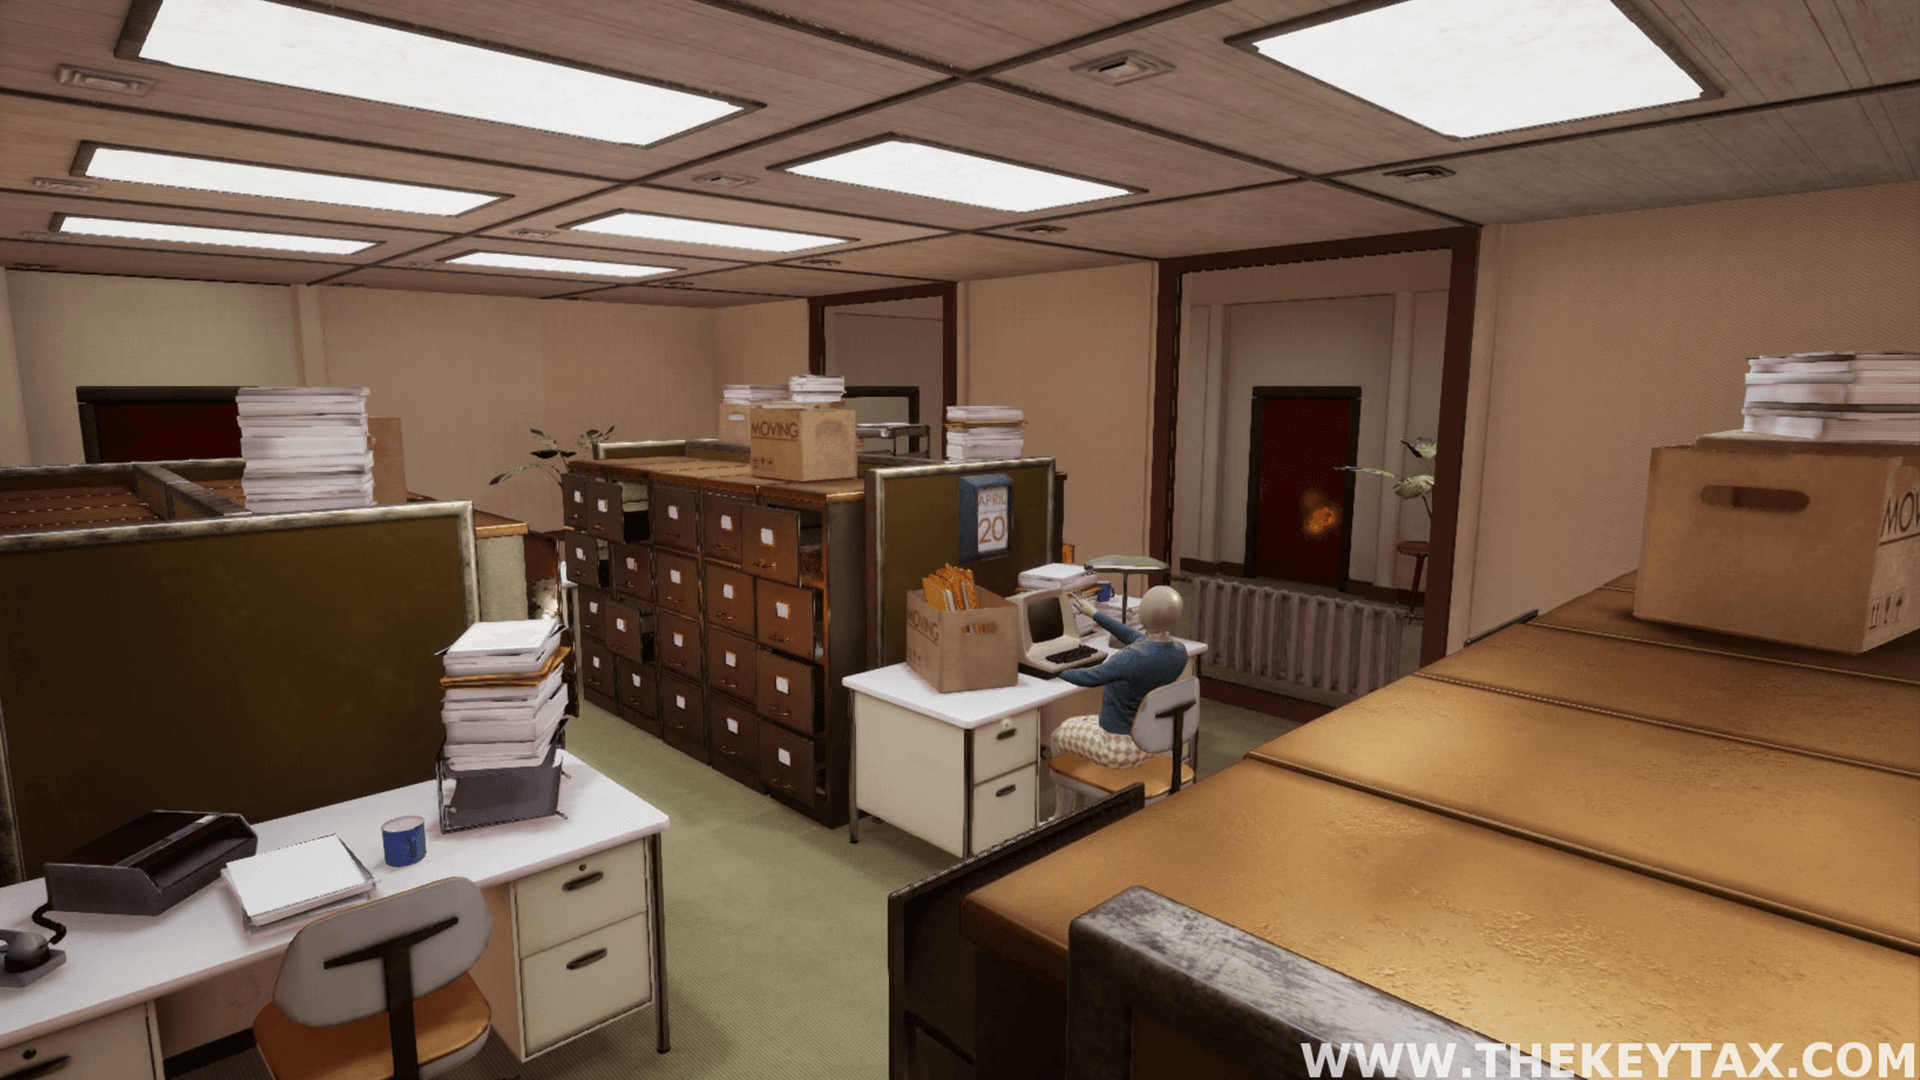 A 1970s office environment is seen with many props, including paperwork, desks, old computers, a mannequin typing, chairs, plants, and cups.